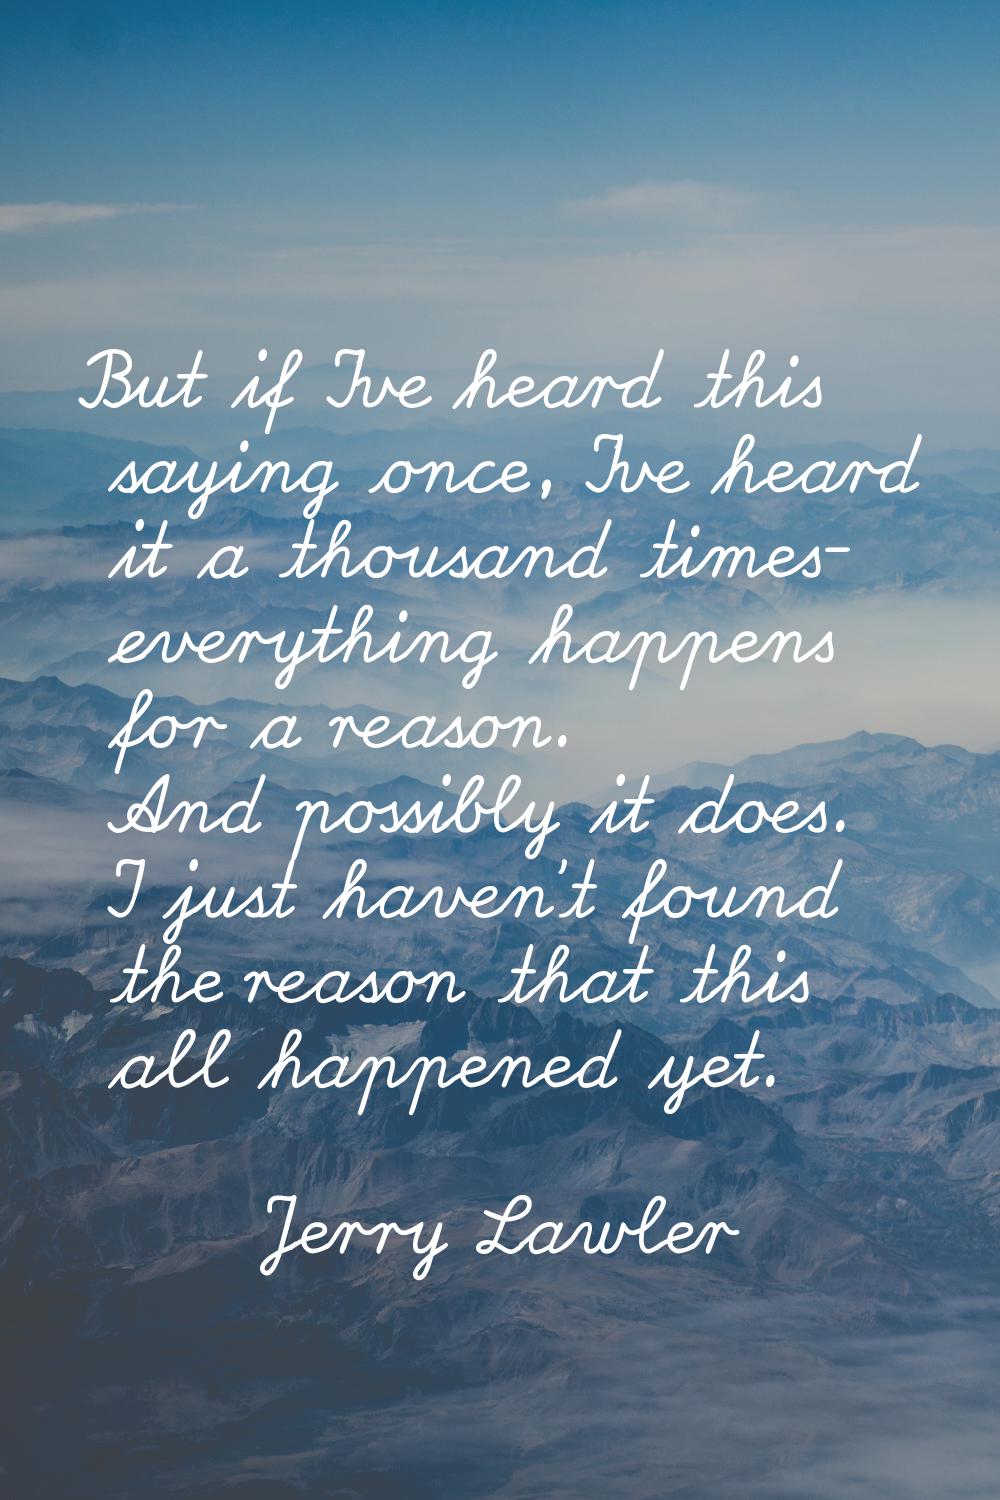 But if I've heard this saying once, I've heard it a thousand times- everything happens for a reason